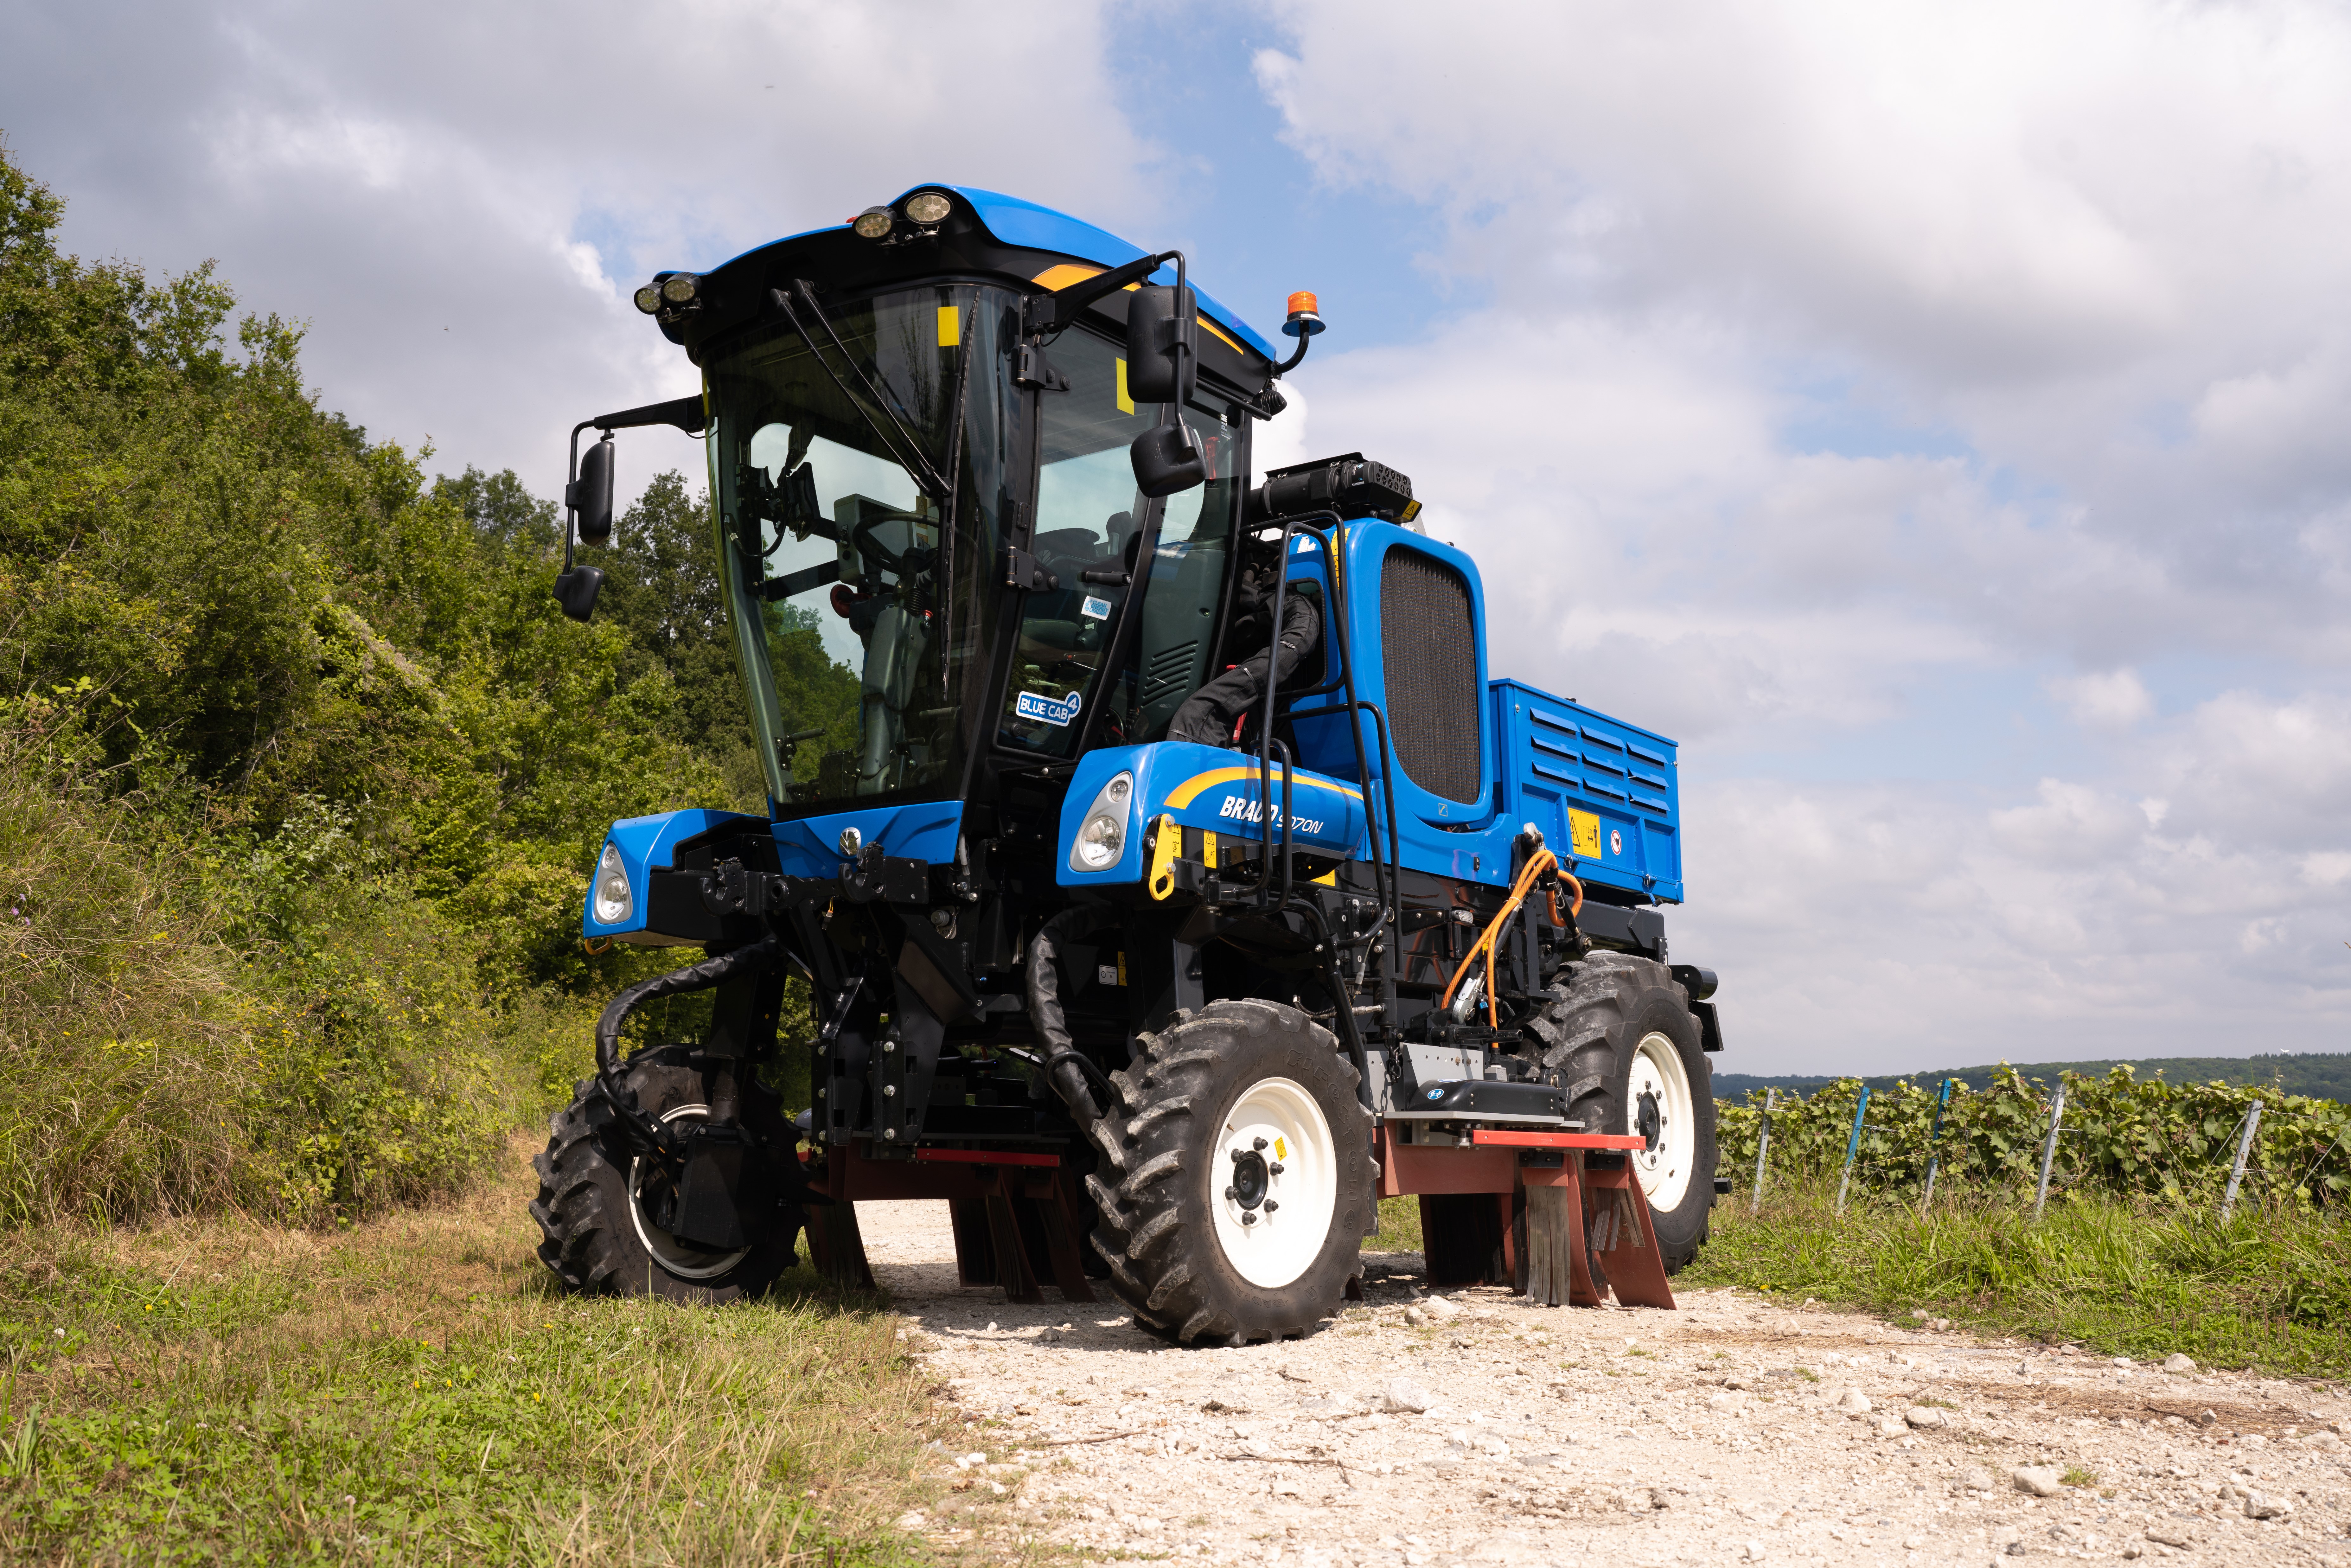 New Holland Agriculture extends the XPower family of electric weeding solutions with the new XPN concept for narrow vineyards integrated in the New Holland Braud 9000N carrier.